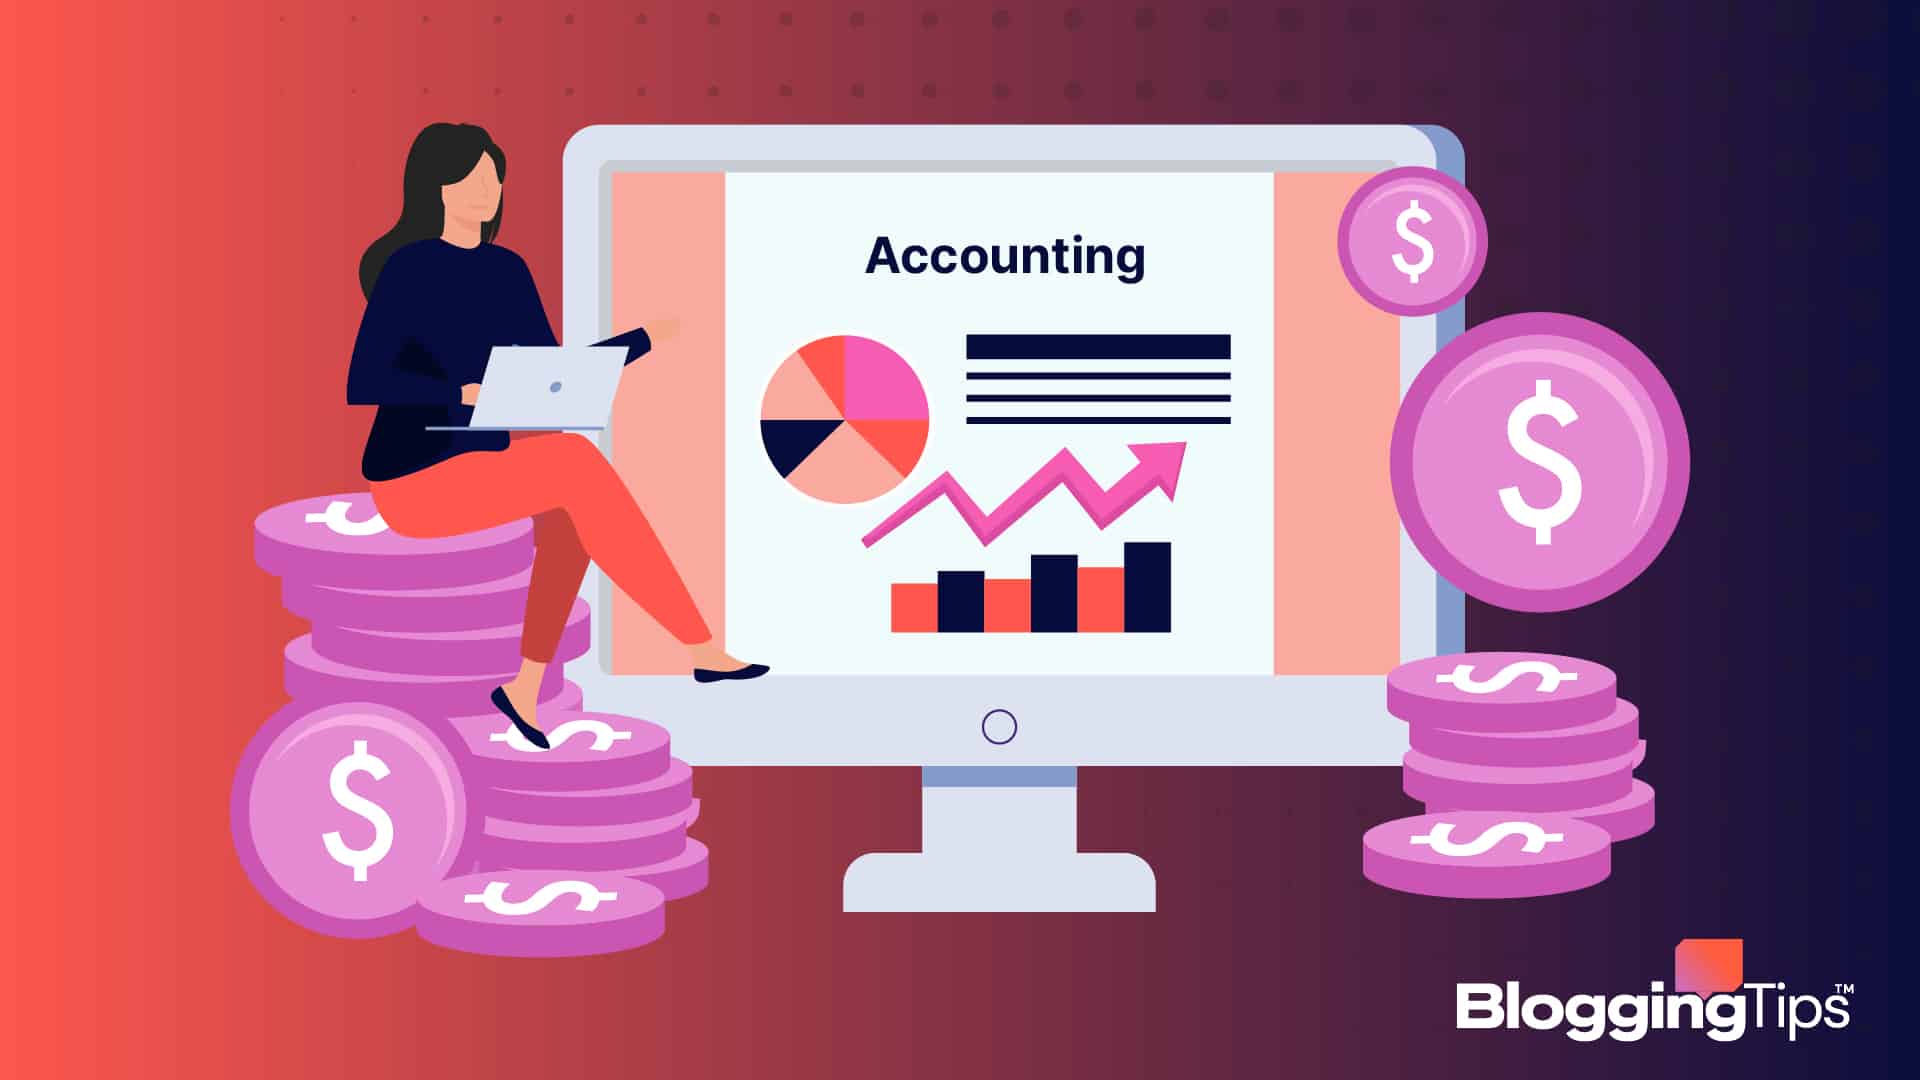 vector graphic showing an illustration of the accounting software